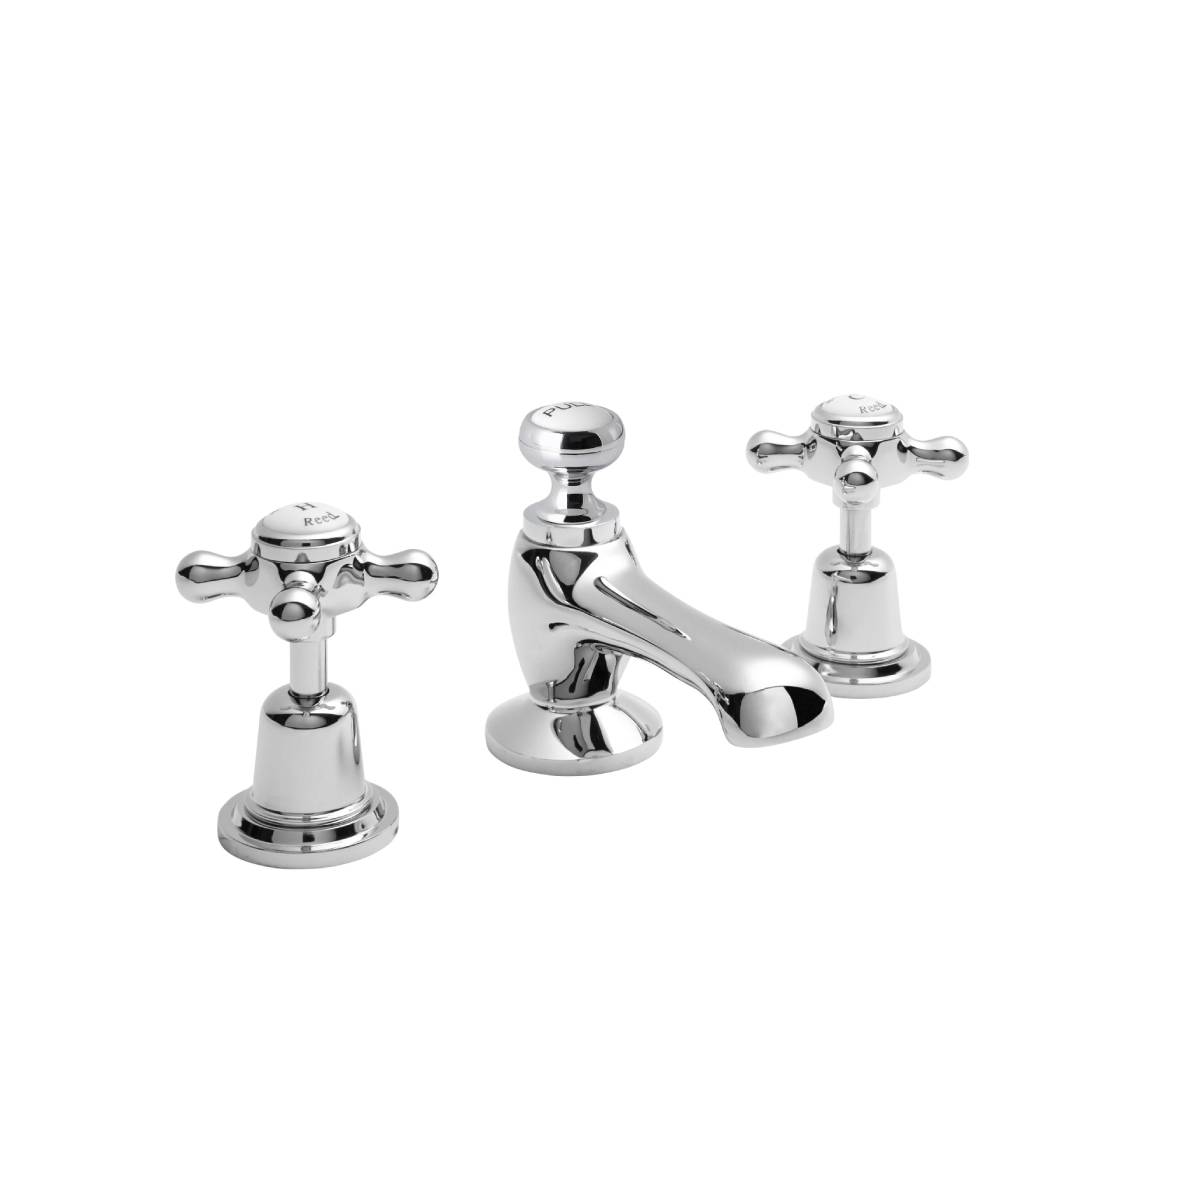 Hudson Reed Topaz with Crosshead 3 Tap Hole Basin Mixer & Domed Collar - White BC307DX (2448)